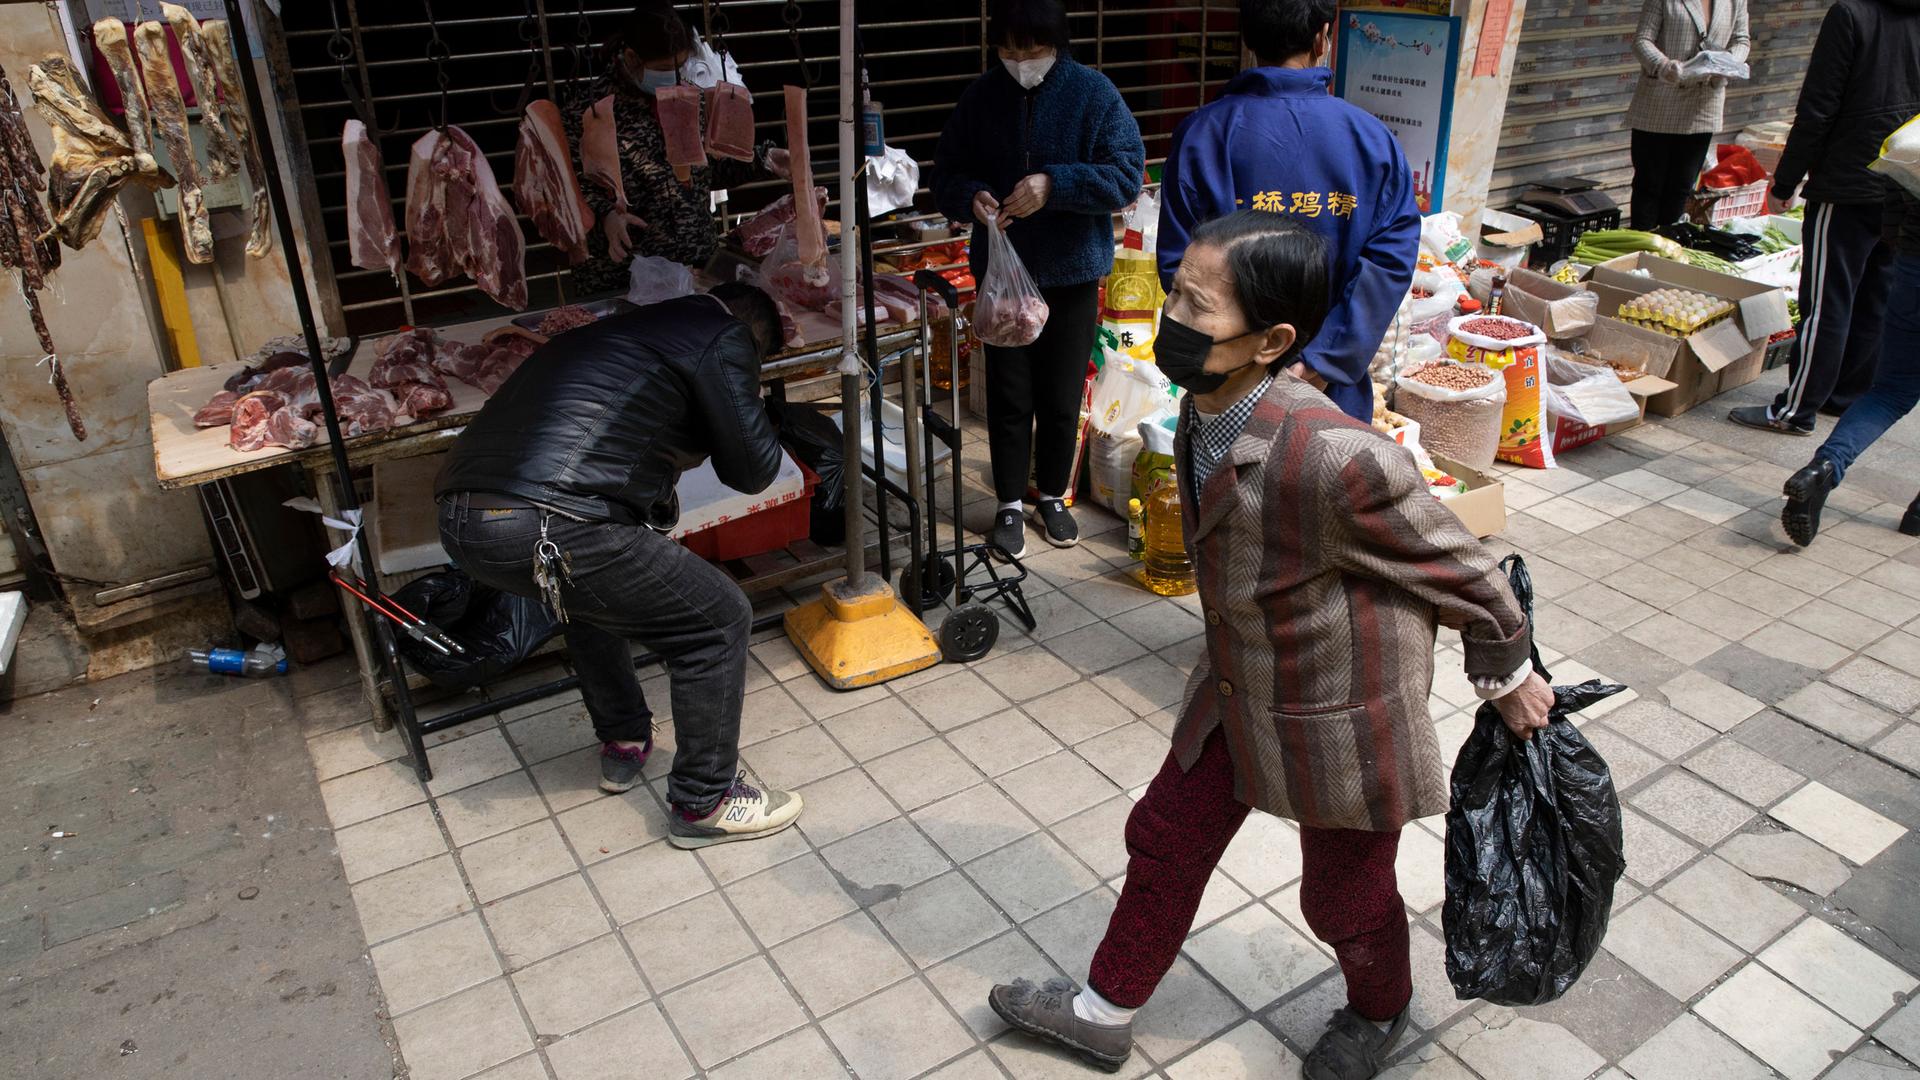 Several people are shown outside of a partially closed market stall with several pieces of meat hanging in the background.